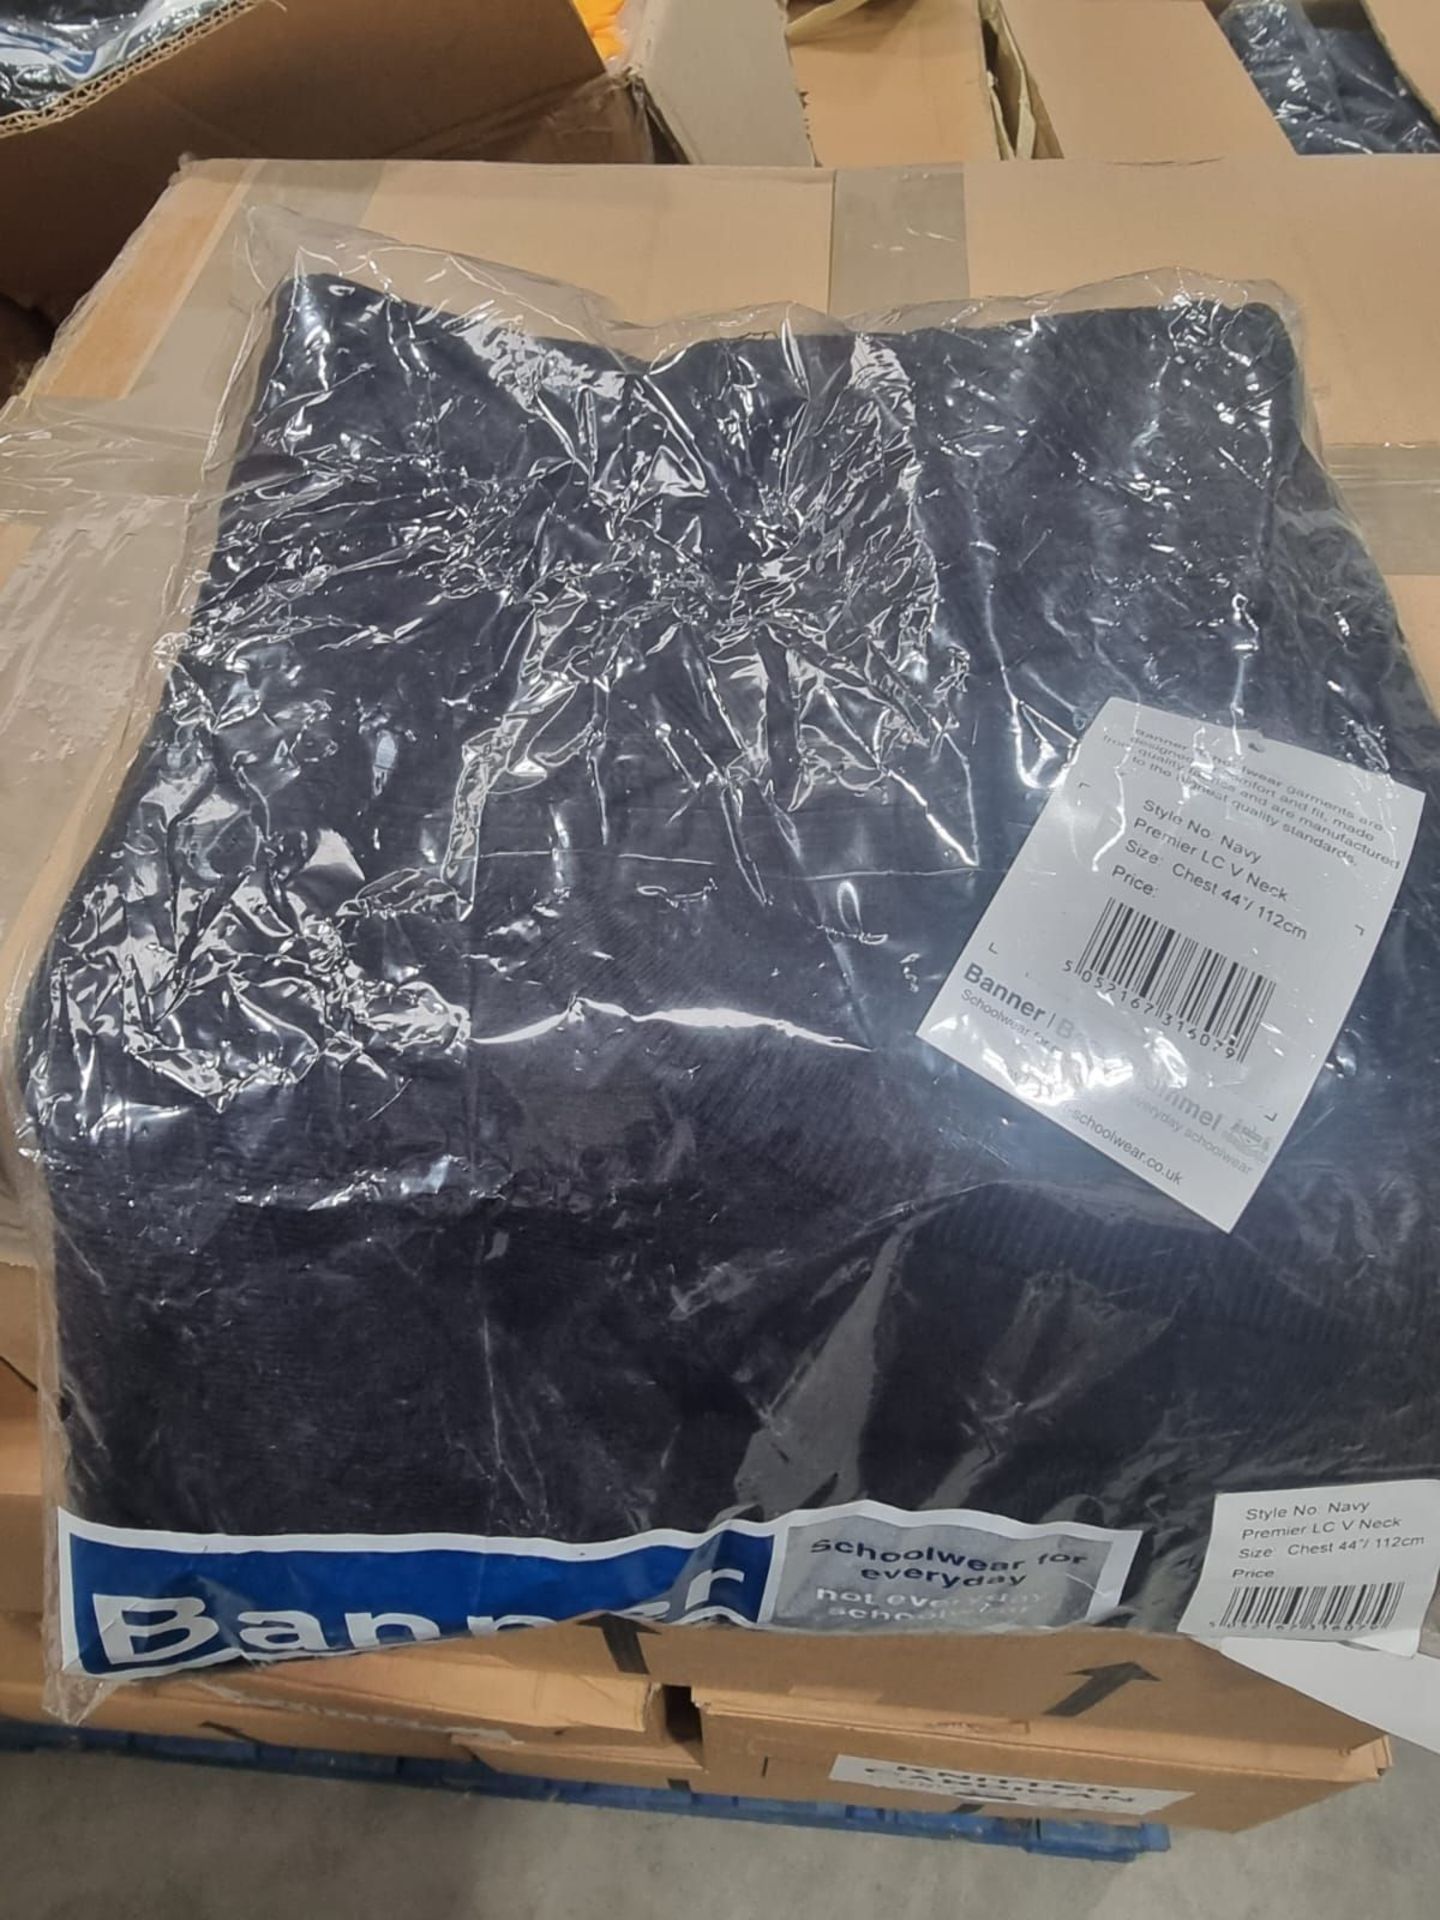 PALLET TO CONTAIN A LARGE QUANTITY OF NEW CLOTHING GOODS. MAY INCLUDE ITEMS SUCH AS: T-SHIRTS, - Image 20 of 28